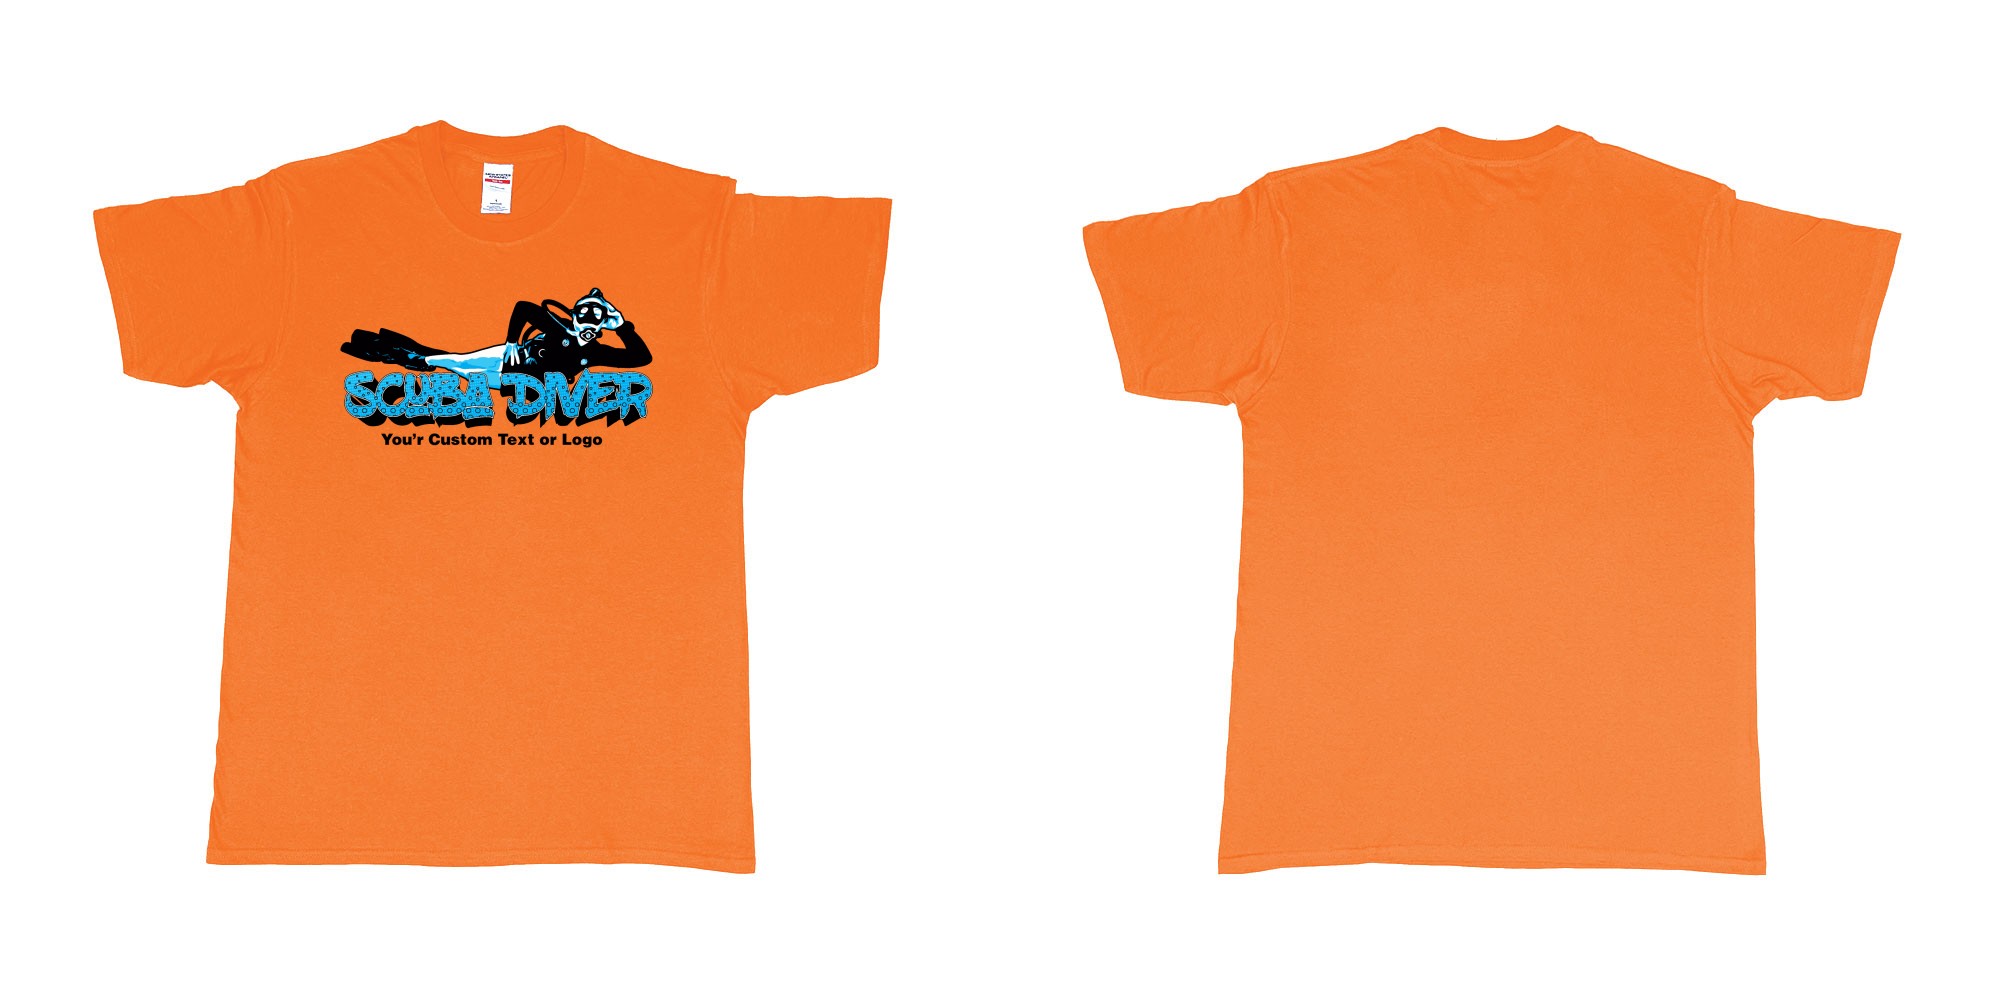 Custom tshirt design relaxed scuba diver in fabric color orange choice your own text made in Bali by The Pirate Way